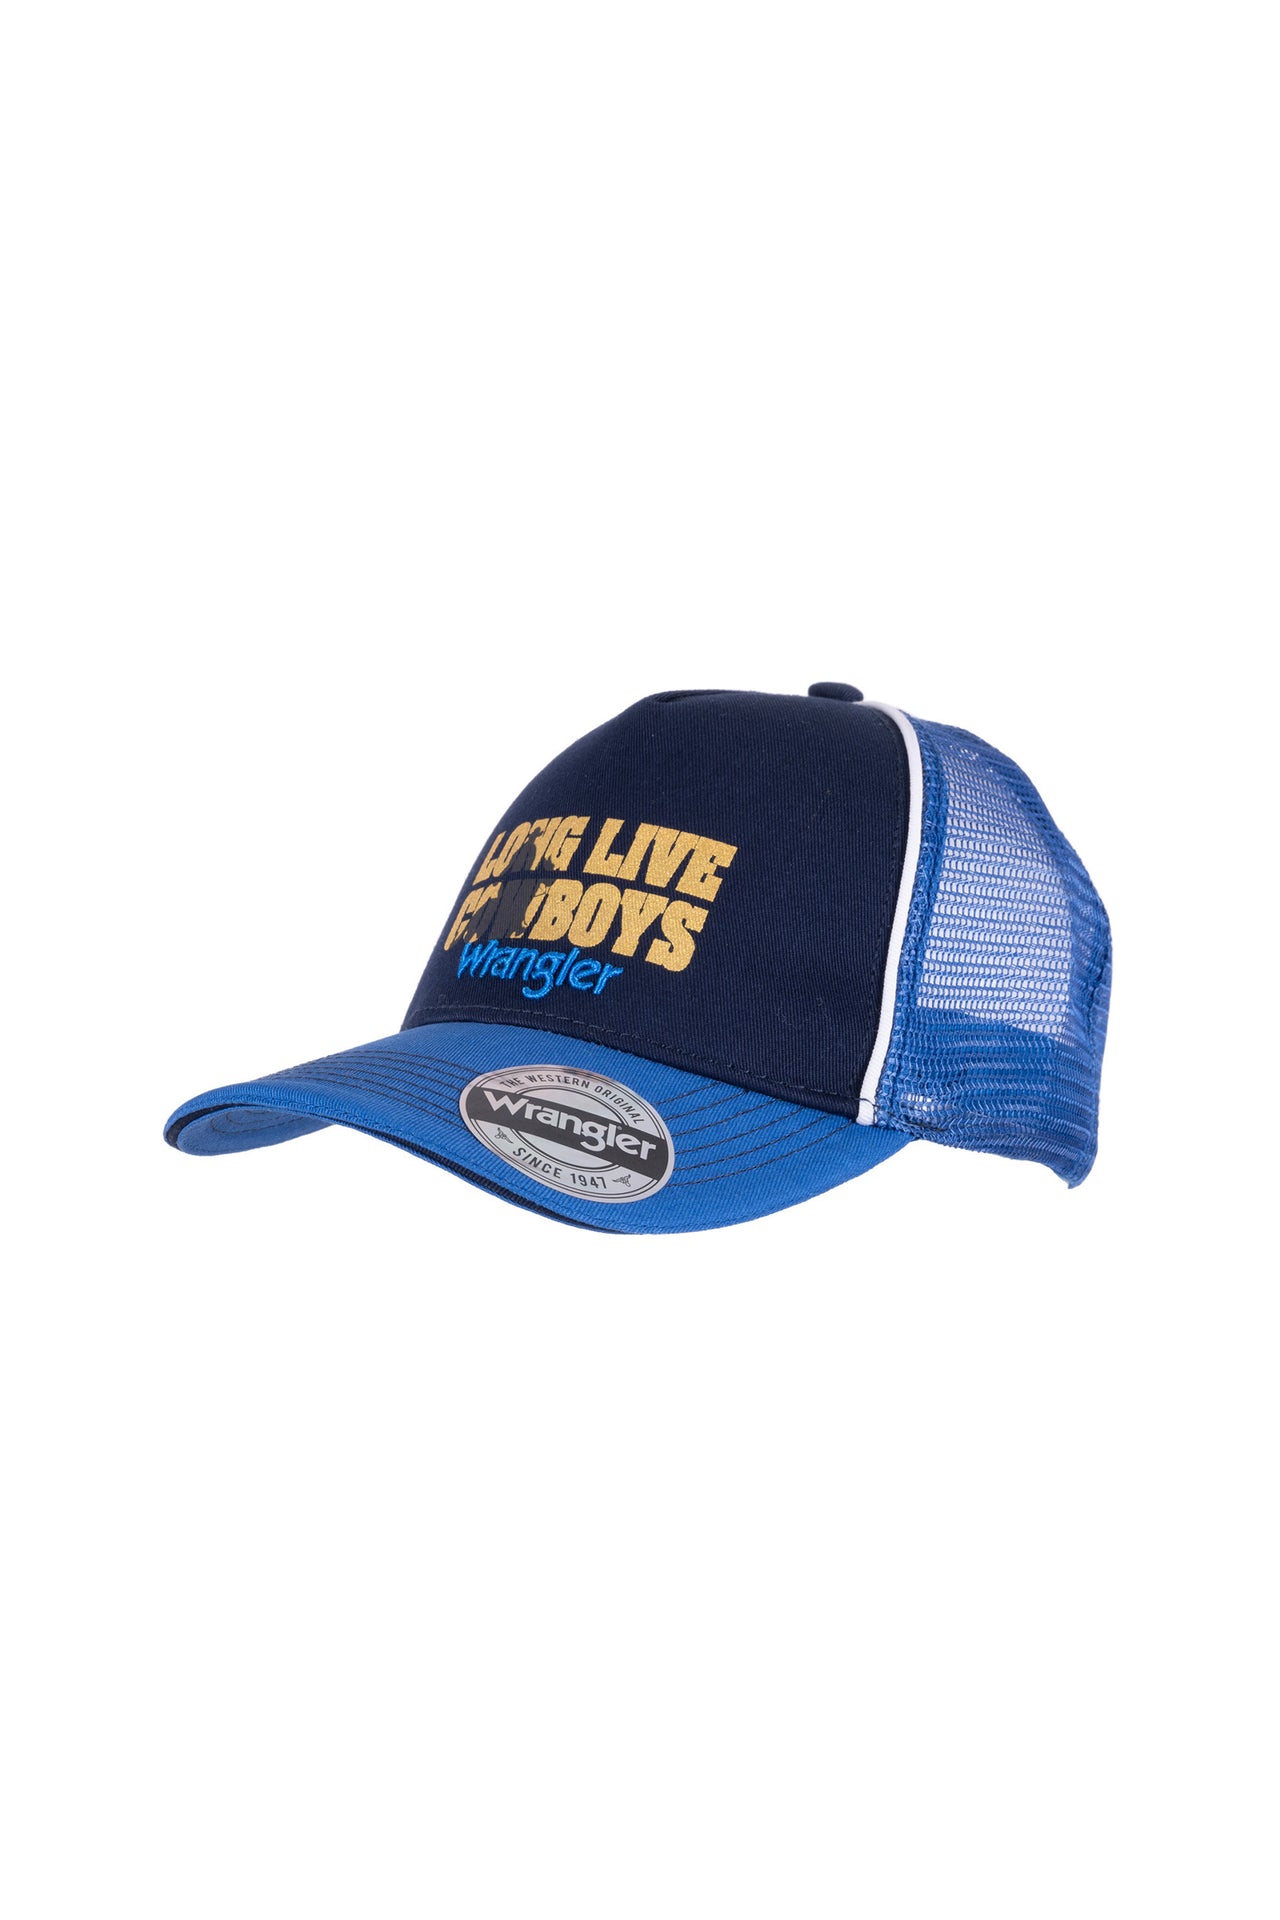 Kids Cowboys Trucker Cap - The Trading Stables